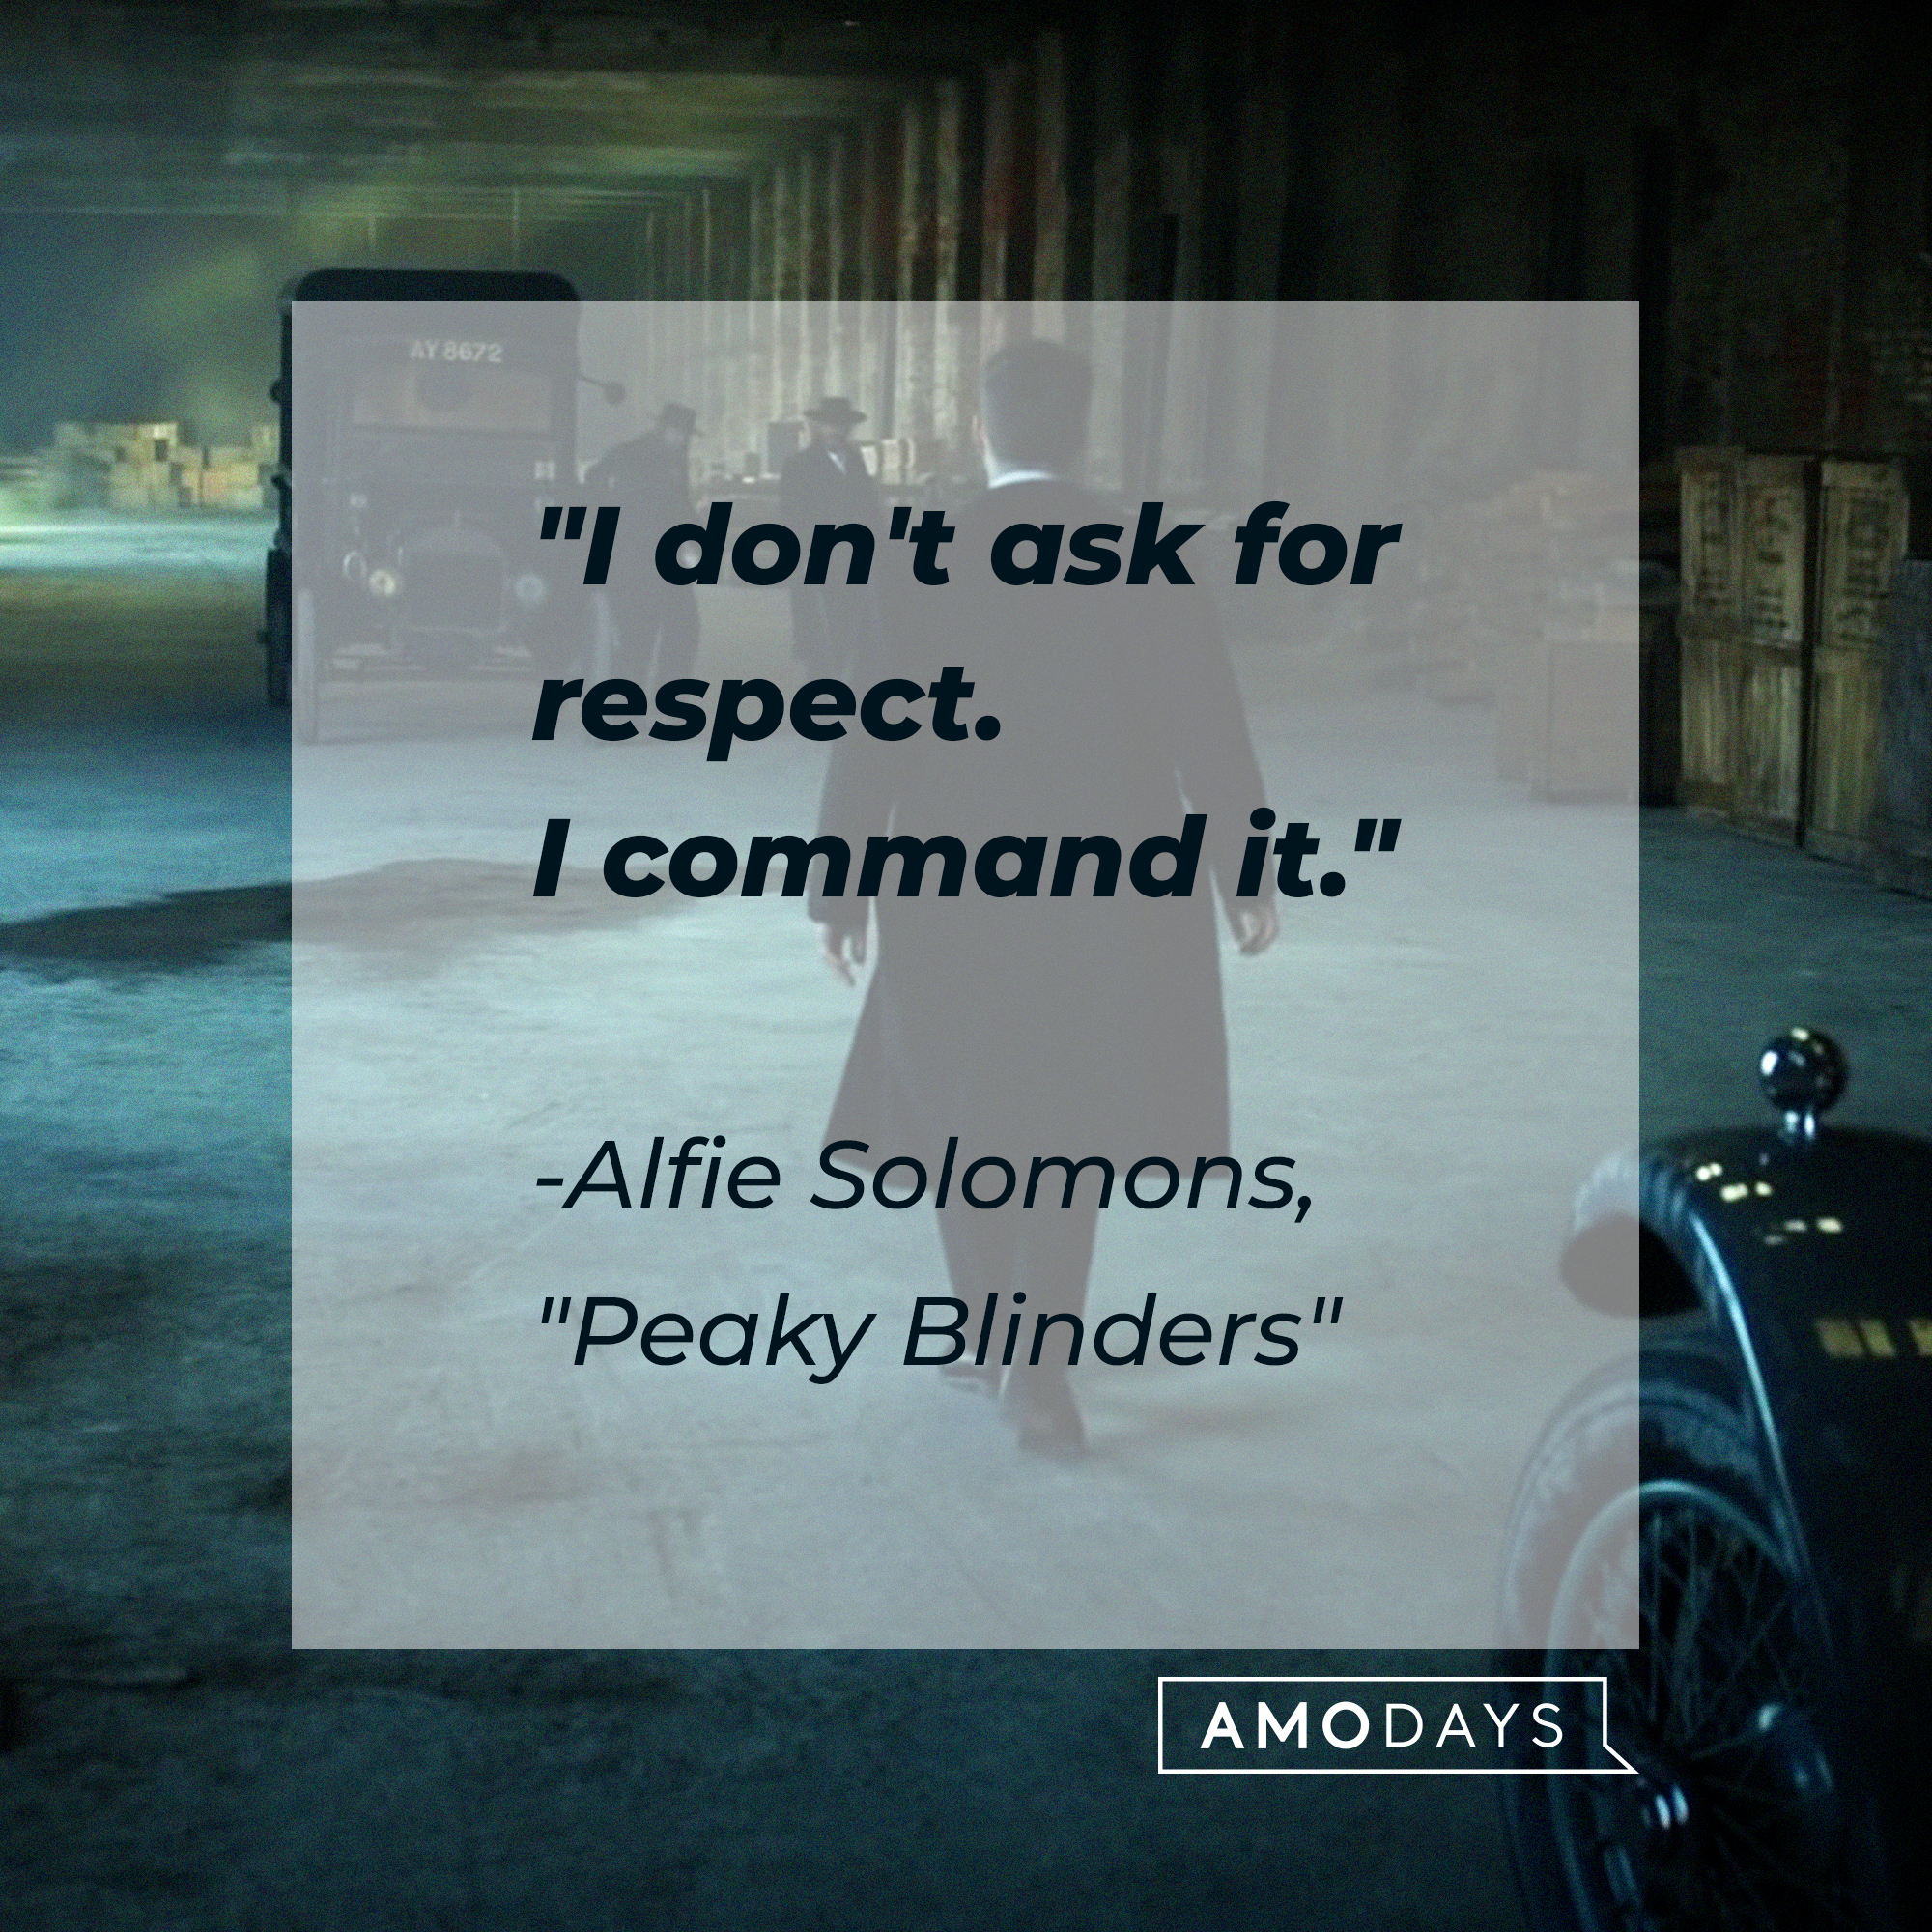 Alfie Solomons’s quote: "I don't ask for respect. I command it." | Source: facebook.com/PeakyBlinders